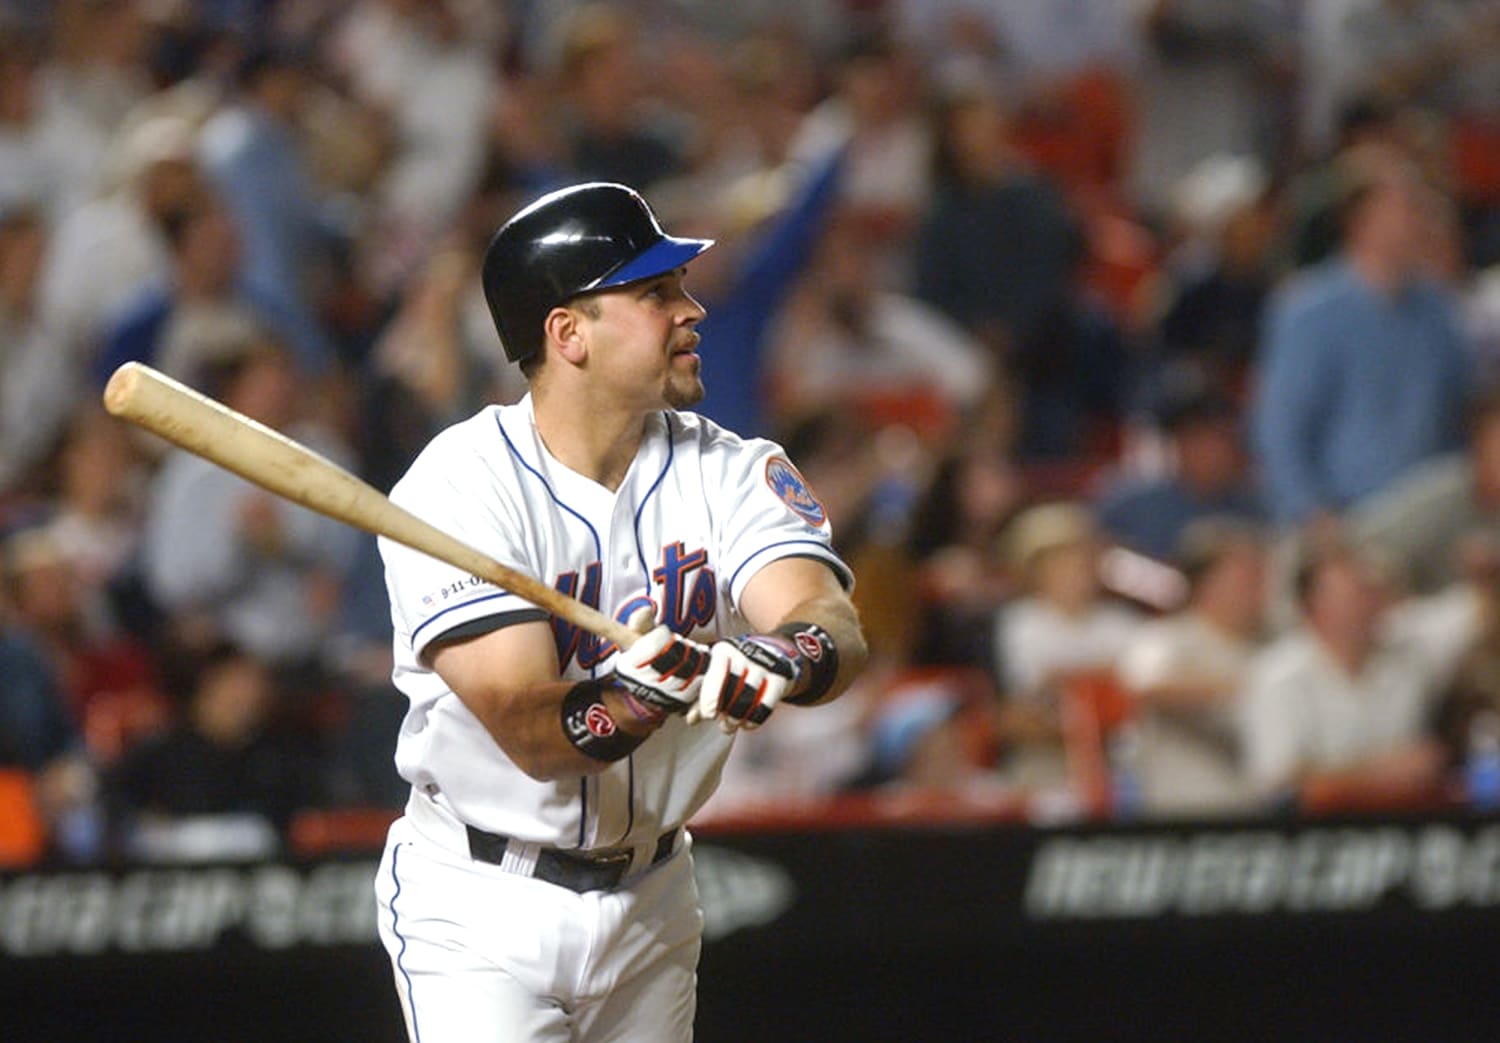 Mike Piazza's Book Is Out Today. Now Can He Be in the Hall of Fame?